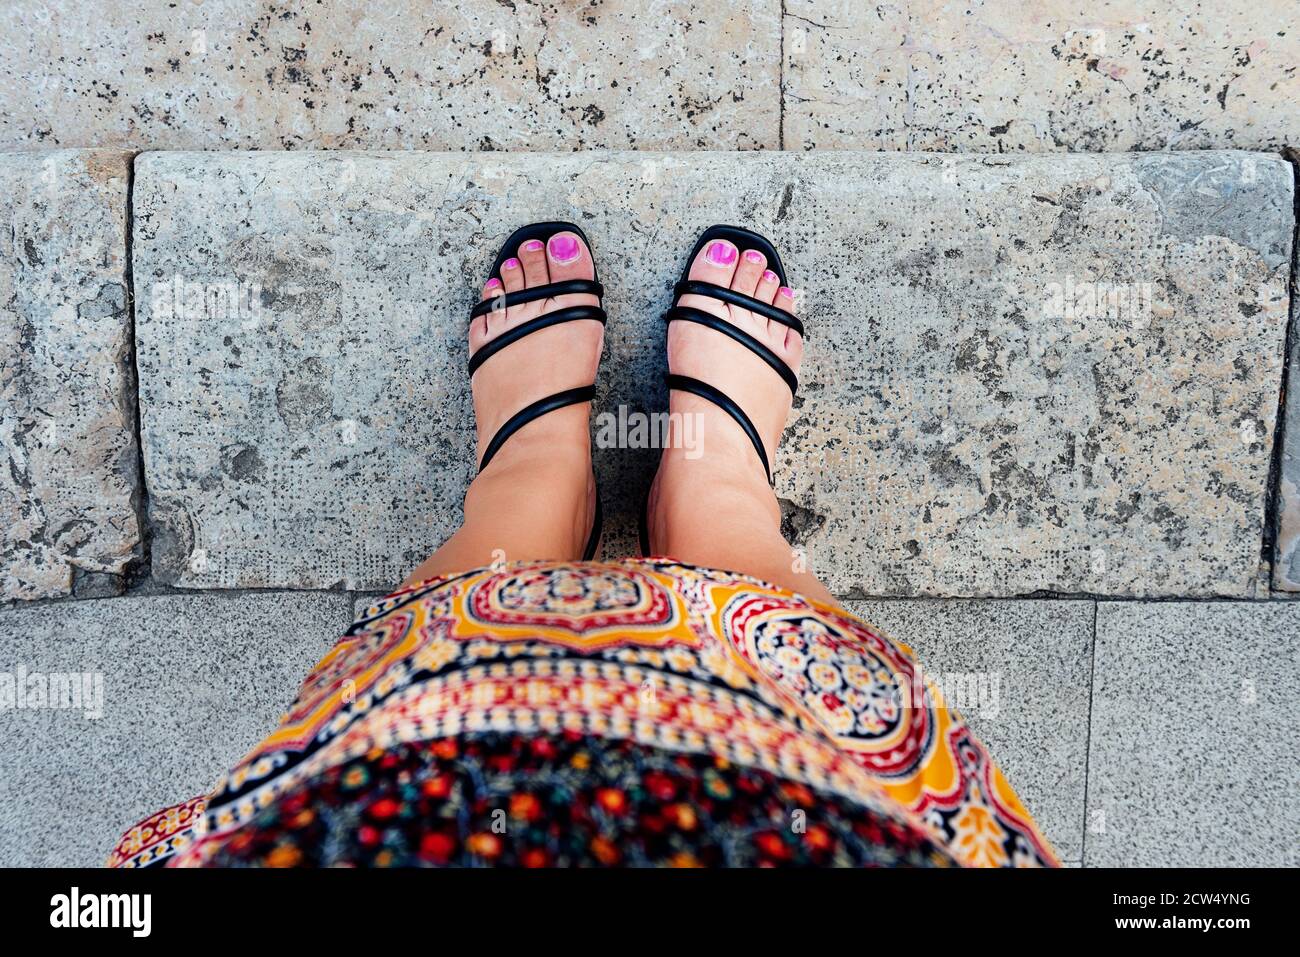 woman's feet in first person view with fuchsia painted nails and black shoes, in Moroccan tribal dress, on gray stone tiles. ethnicity concept Stock Photo